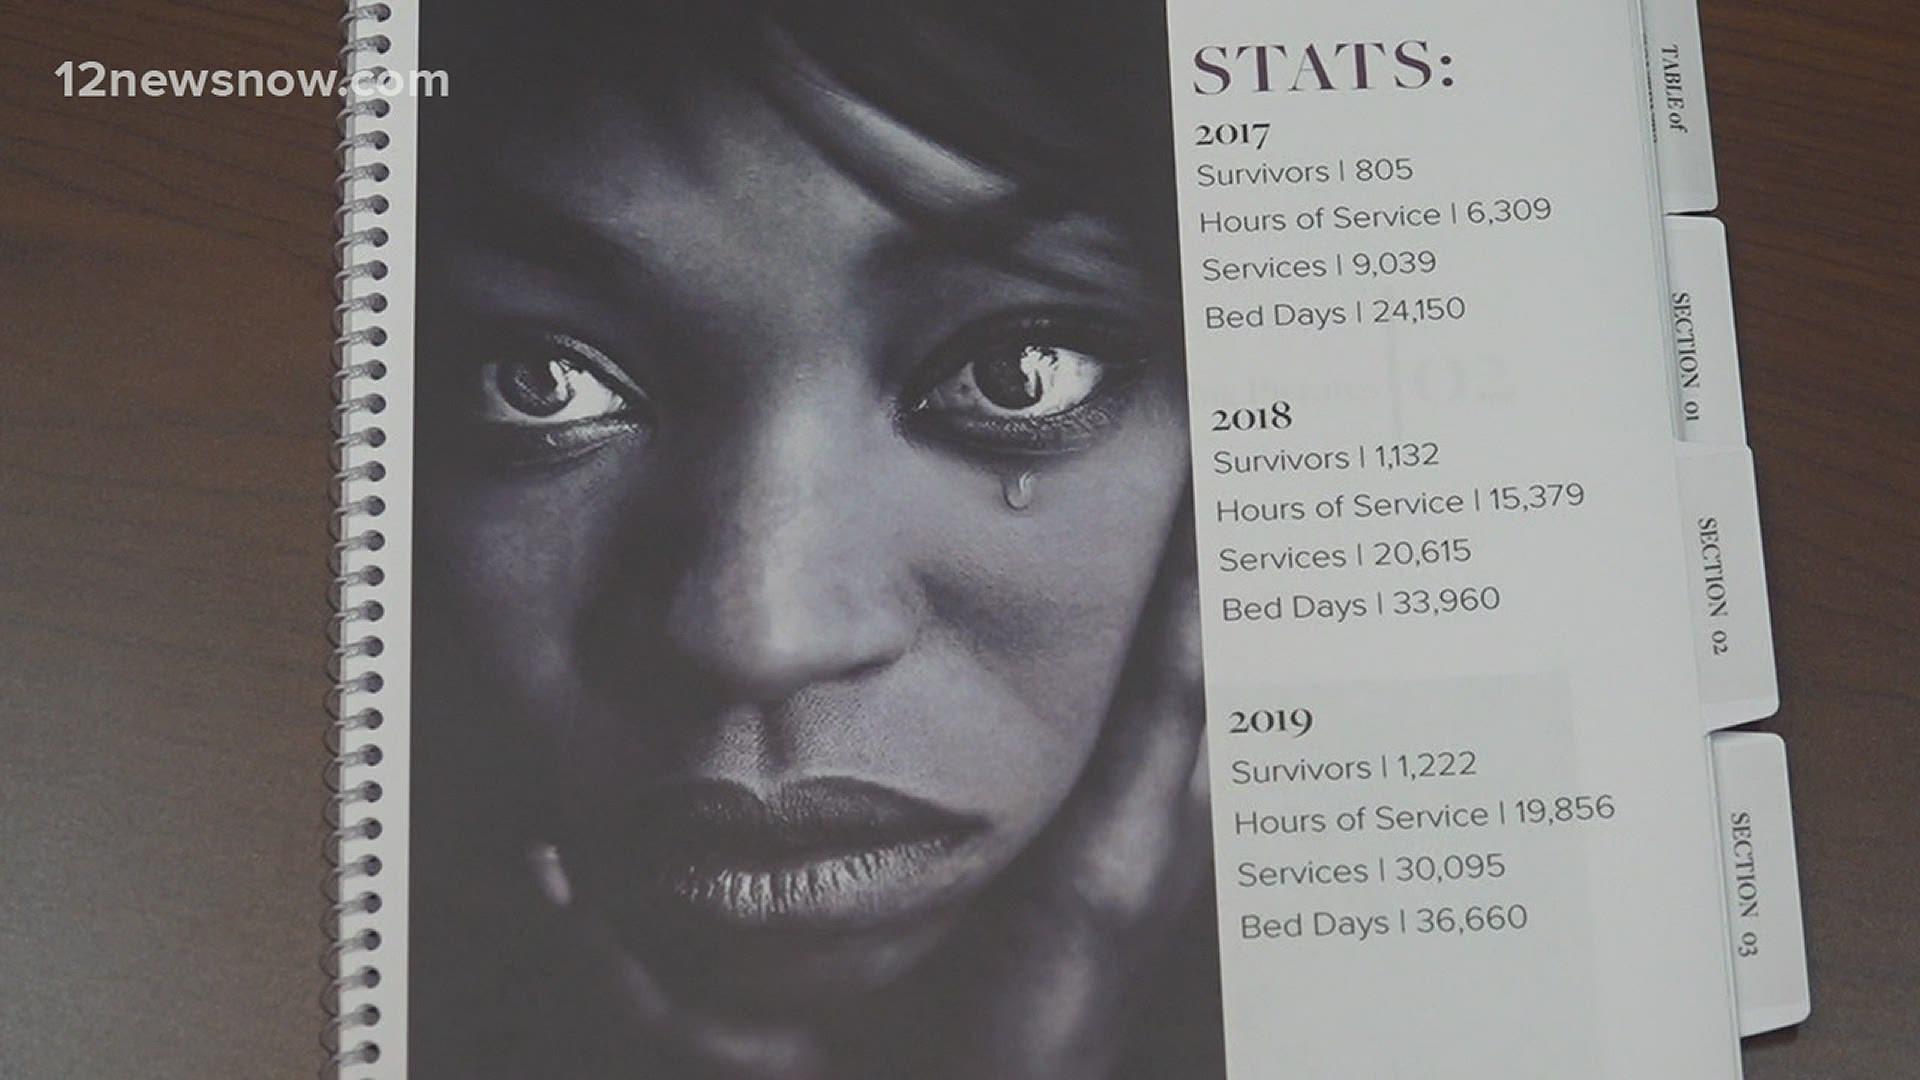 As domestic violence cases have increased during the pandemic, organizations like Family Services of Southeast Texas want victims to know they're here for them.